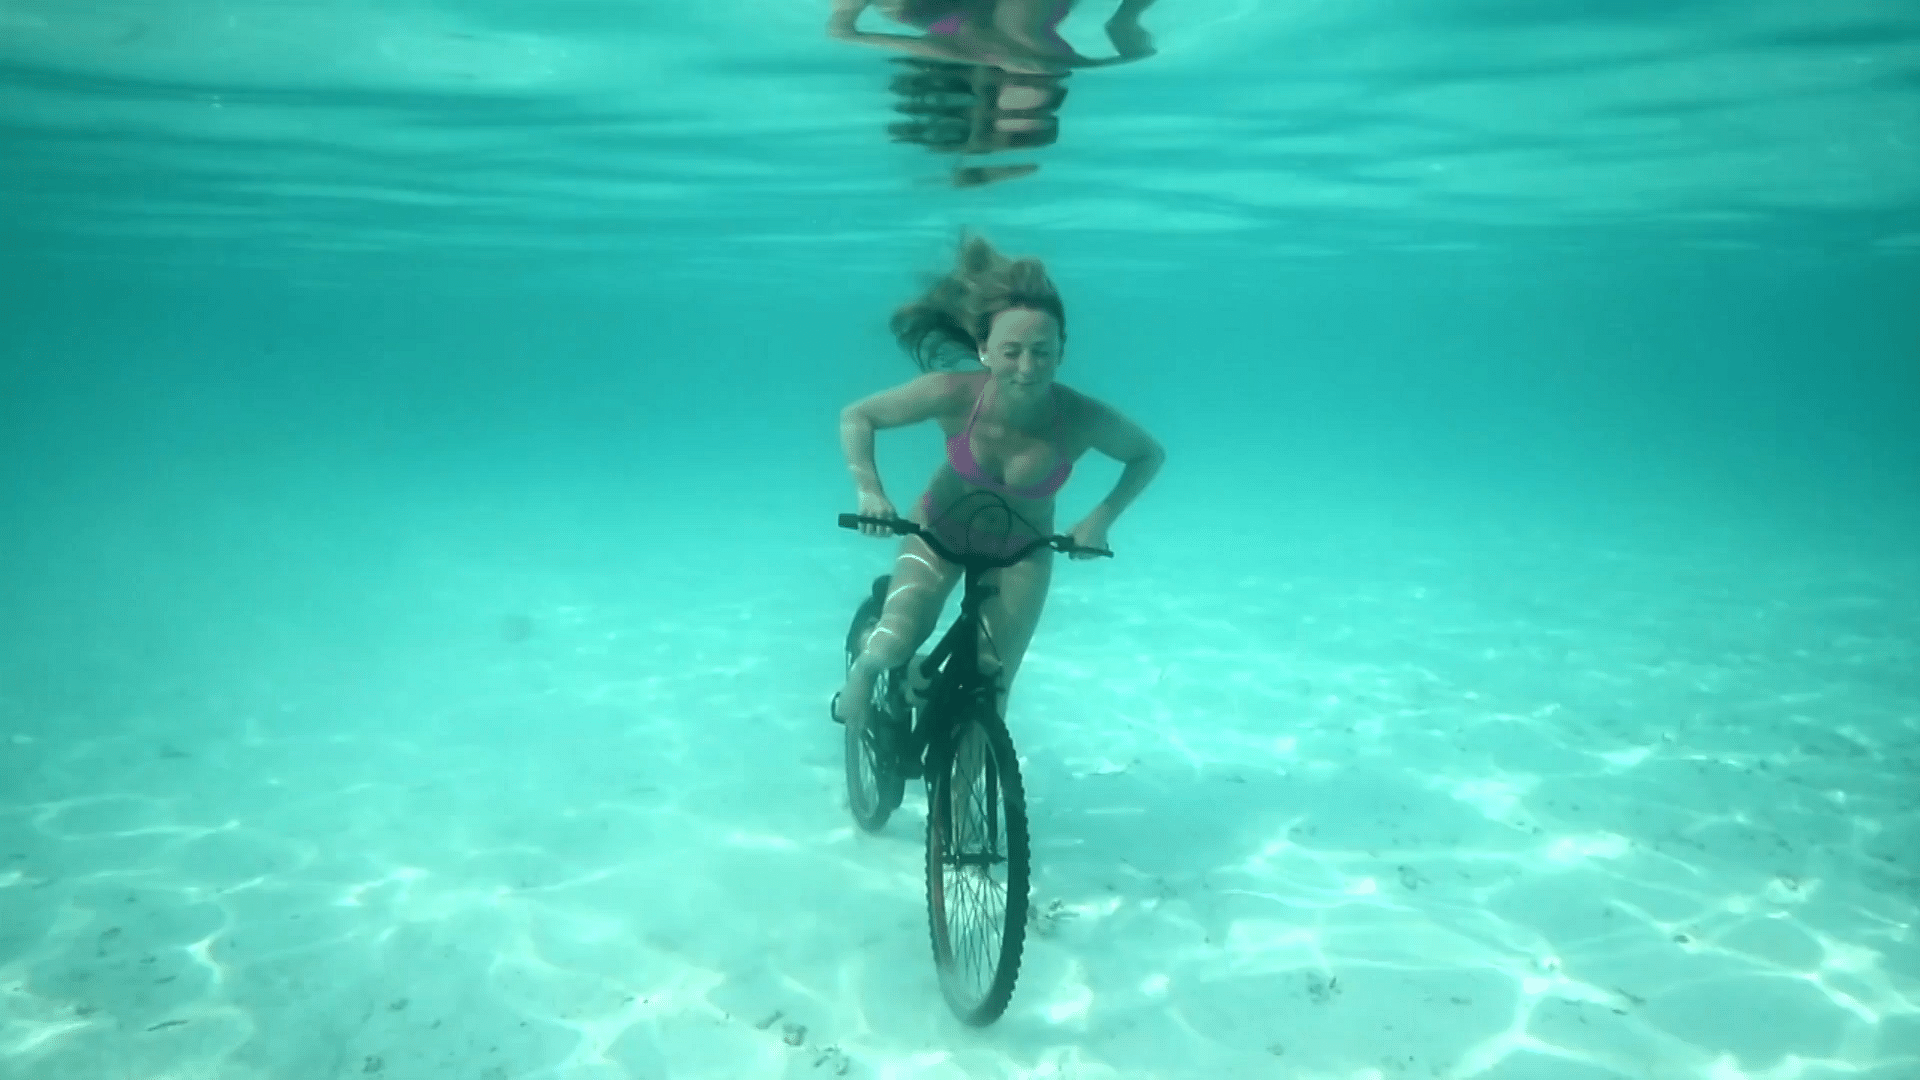 Activist cycles underwater to spread awareness about climate change. (Photo: AP screengrab)